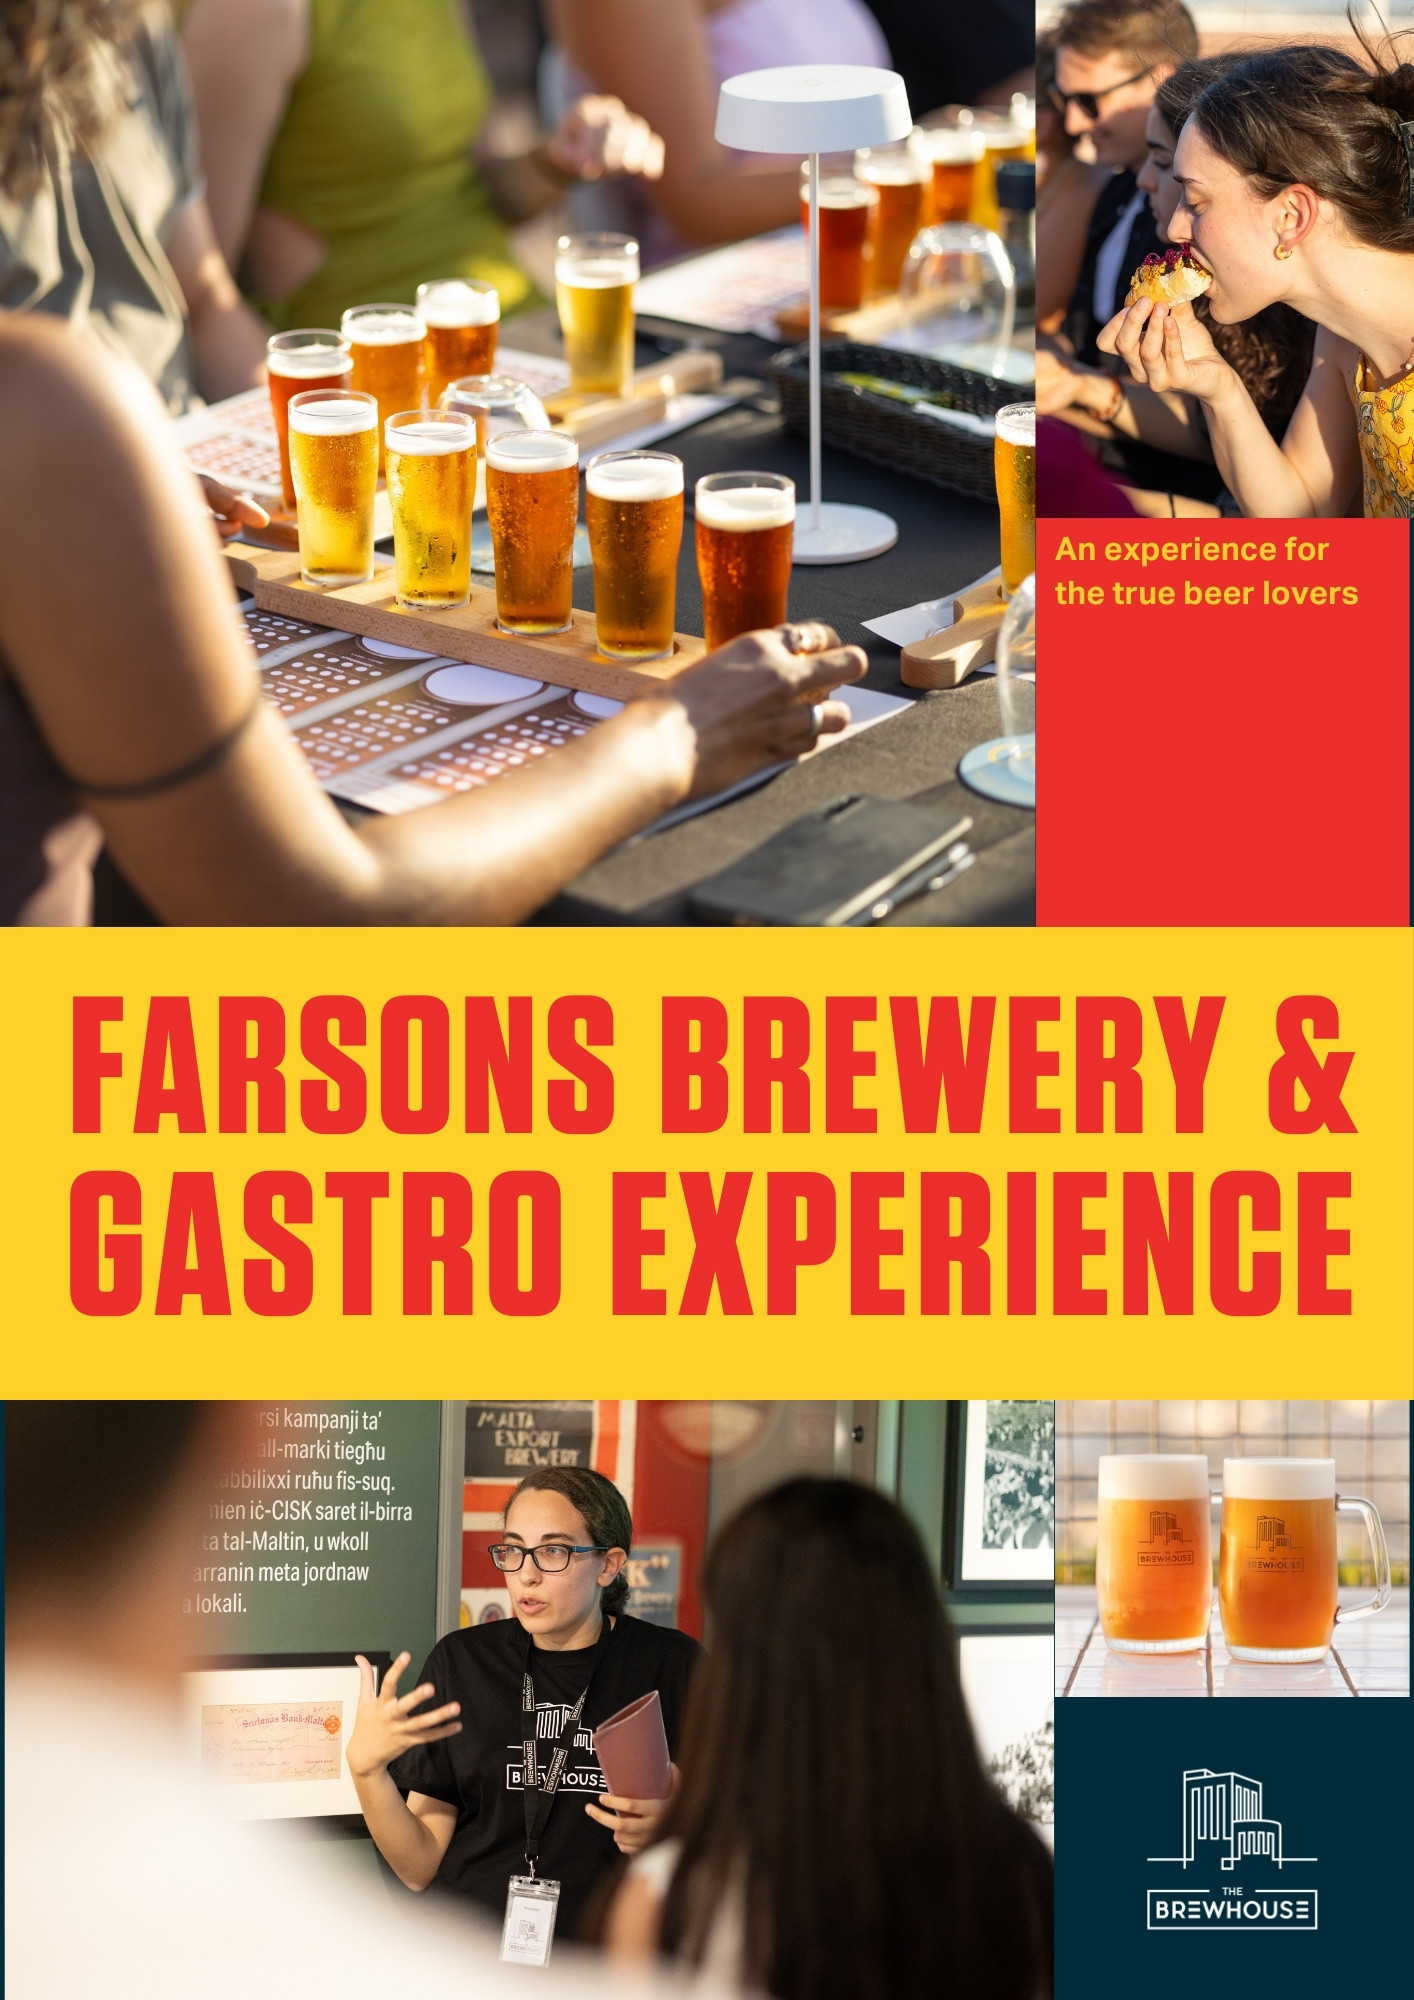 Farsons Brewery & Gastro Experience